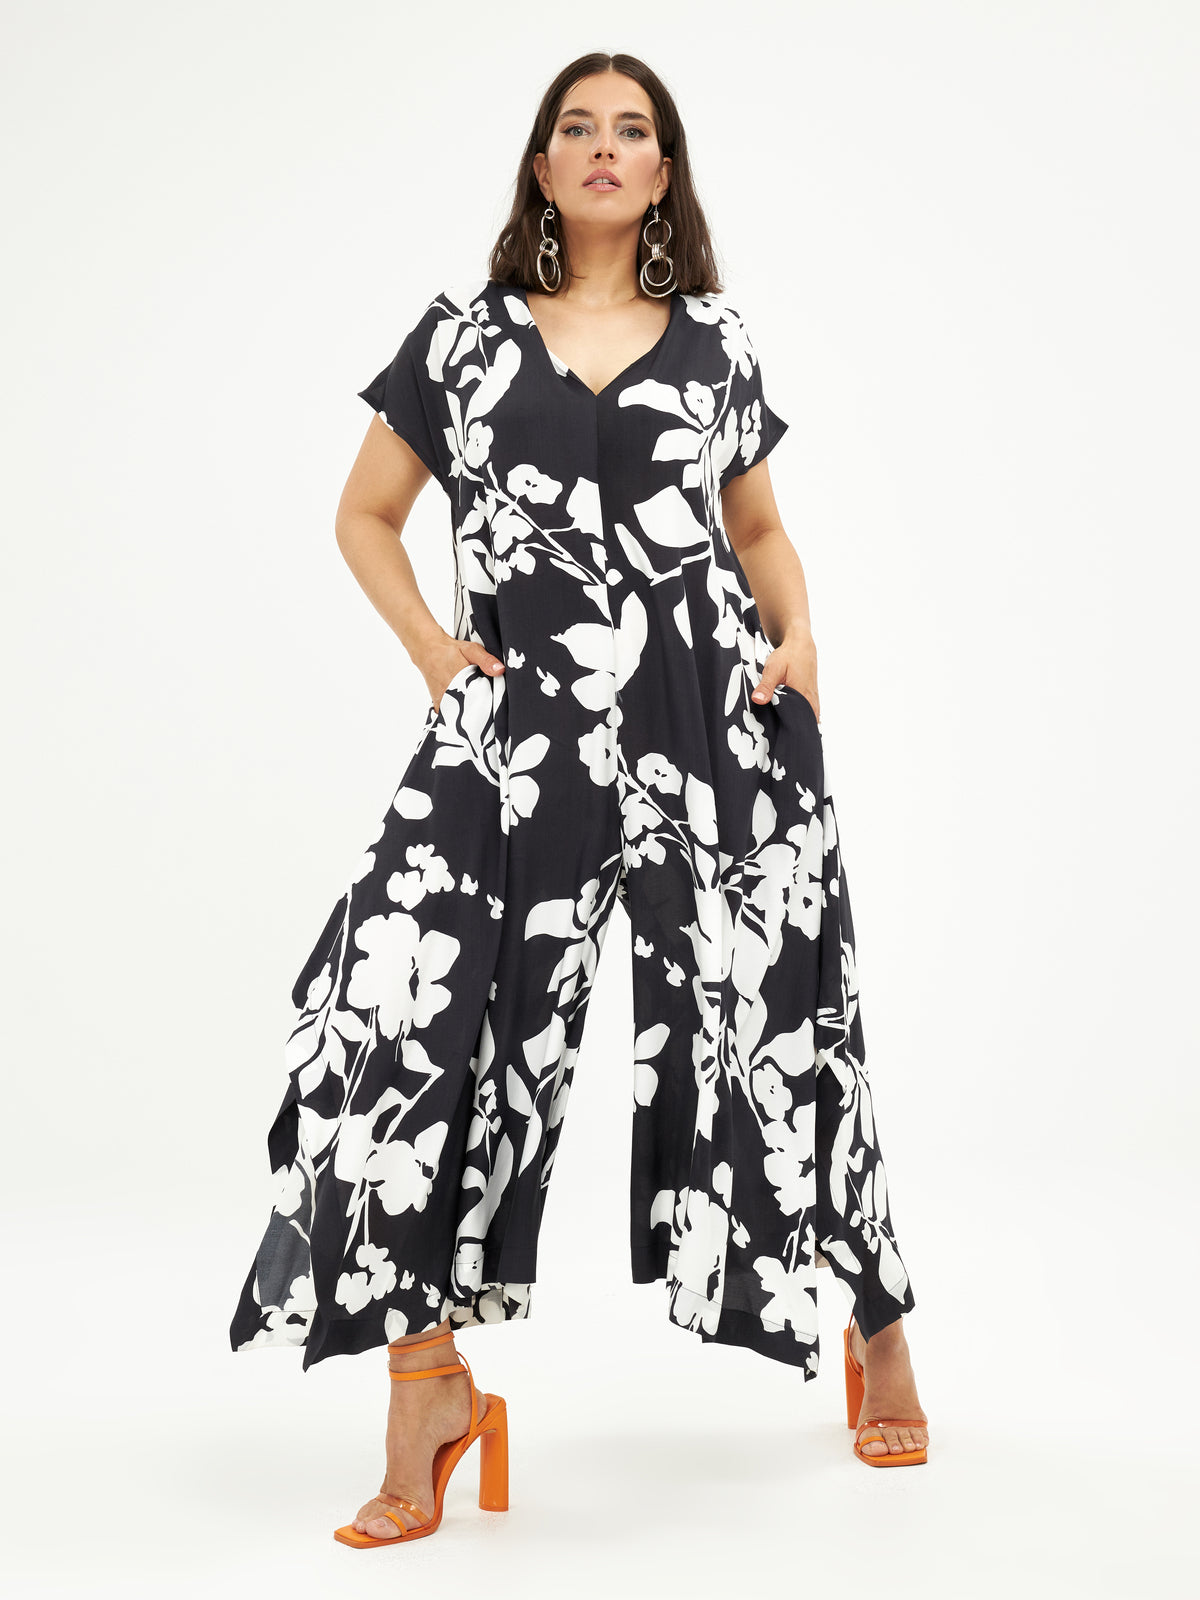 Plus Size Summer Holiday Clothes